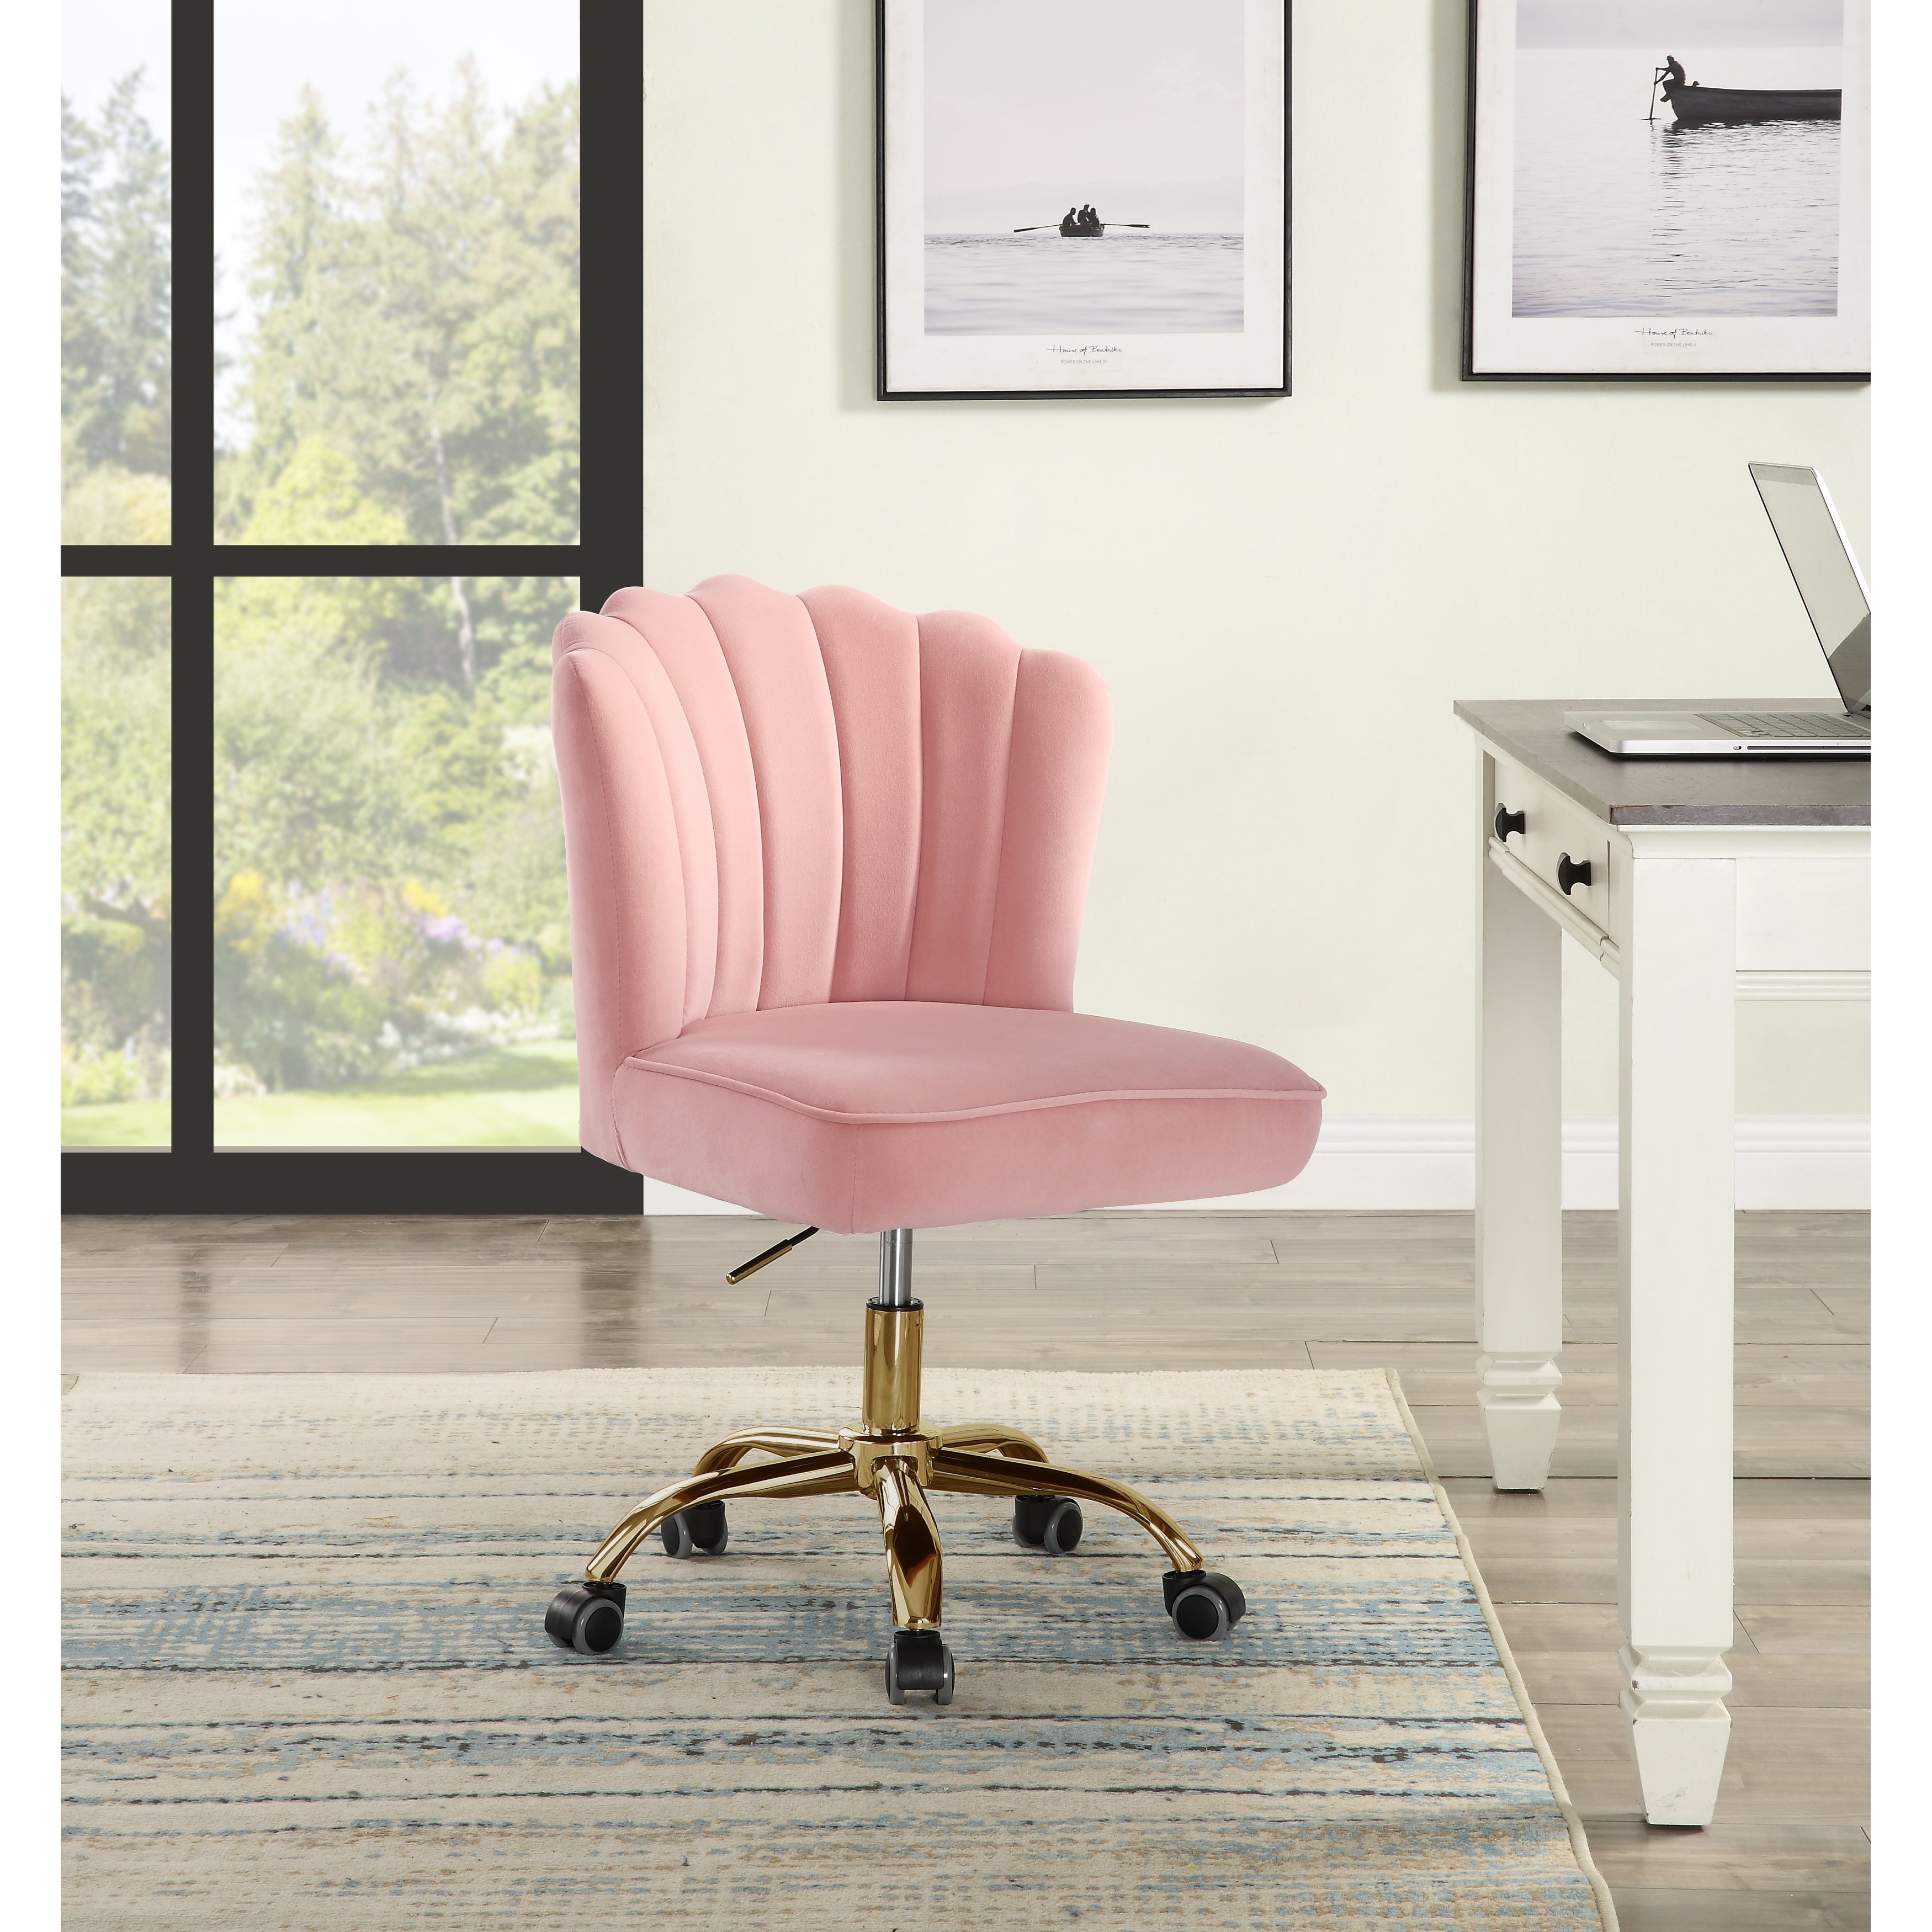 Modern Pink Velvet Office Chair, with Petal-Shaped Backrest, Makeup Chair,  with Gold Finish Five Star Base with Casters - Overstock - 35459016